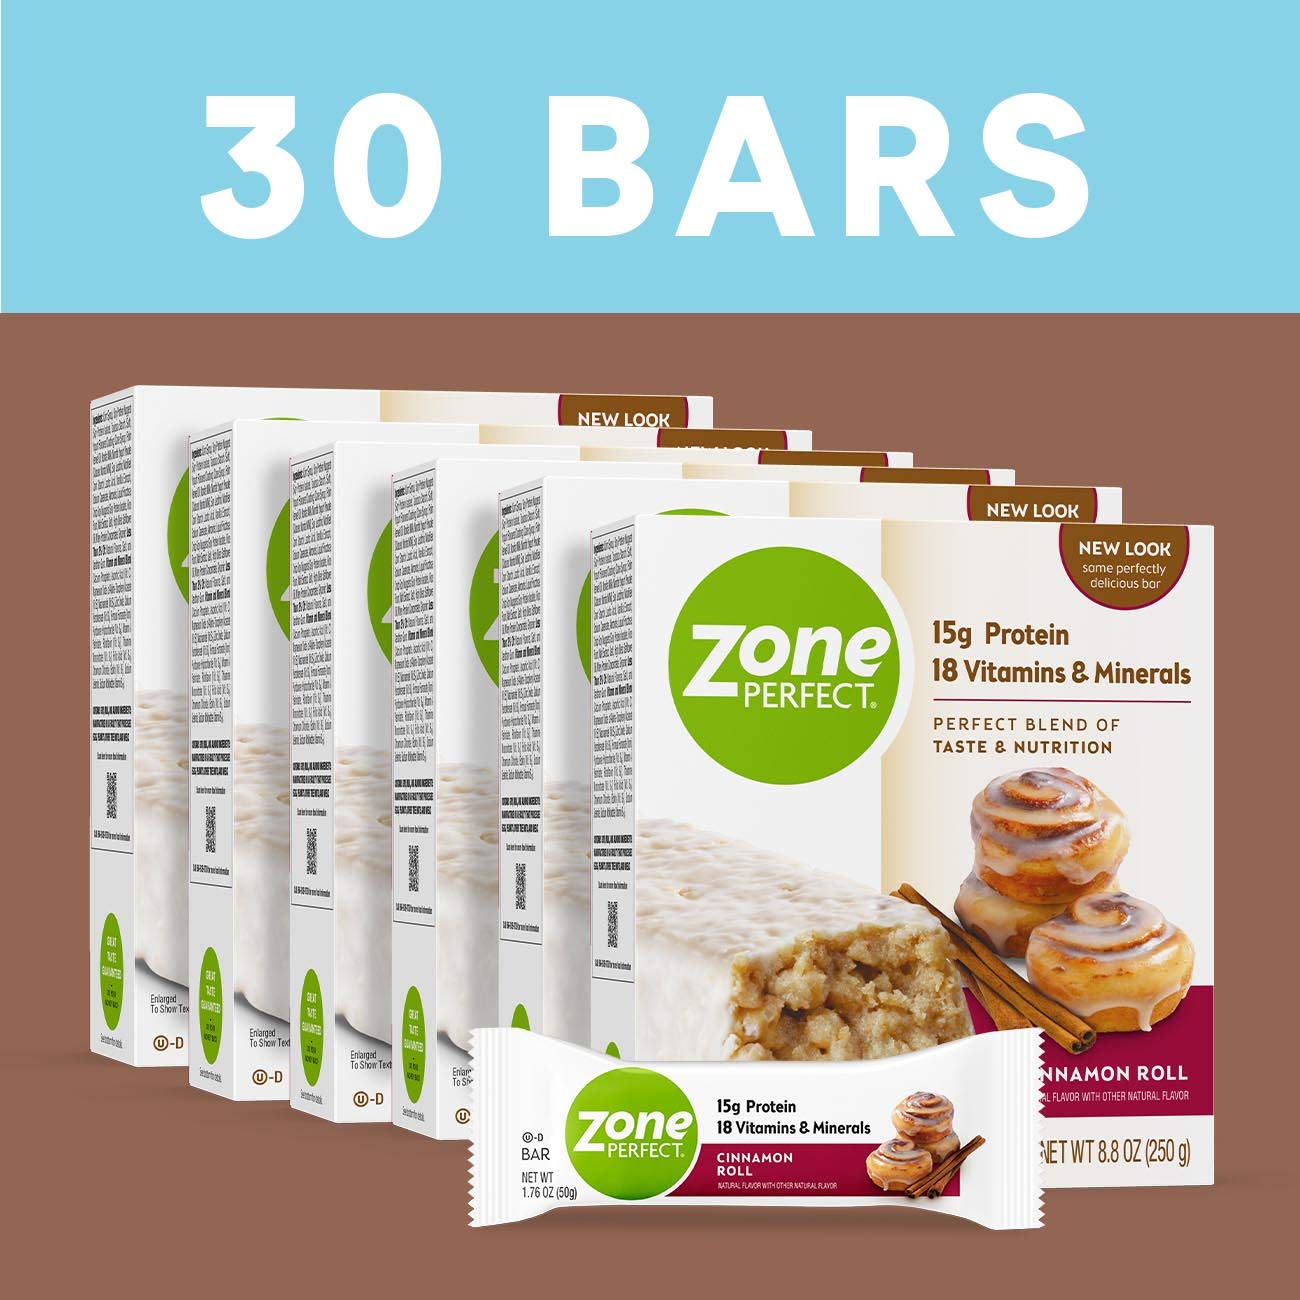 ZonePerfect Protein Bars, 18 vitamins & minerals, 15g protein, Nutritious Snack Bar, Cinnamon Roll, 30 Count